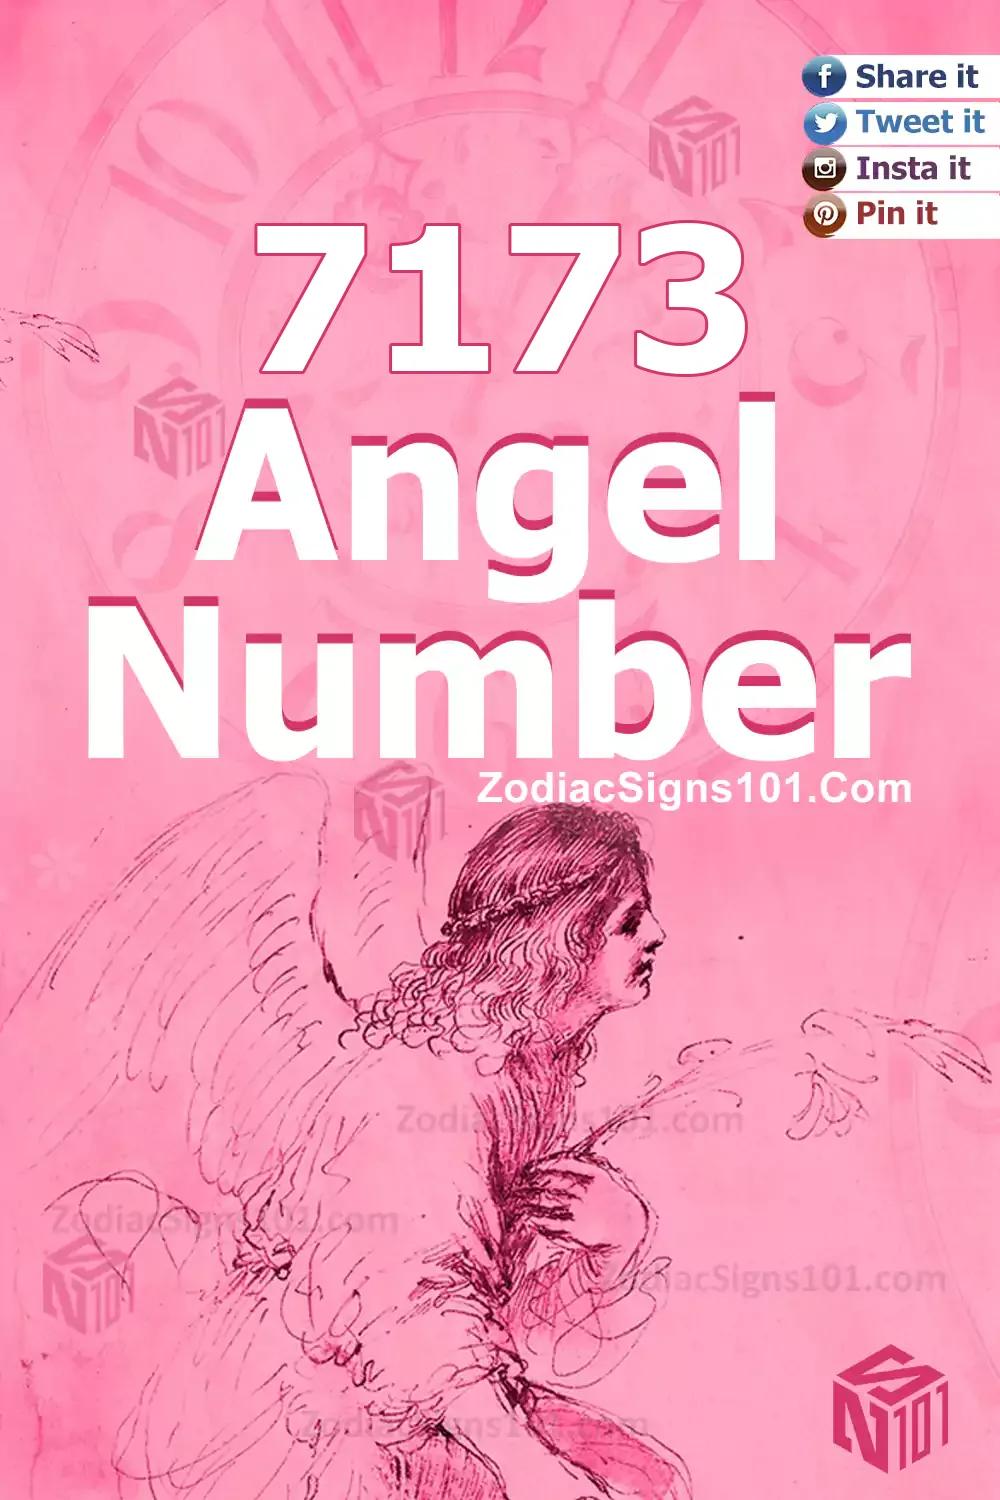 7173 Angel Number Meaning